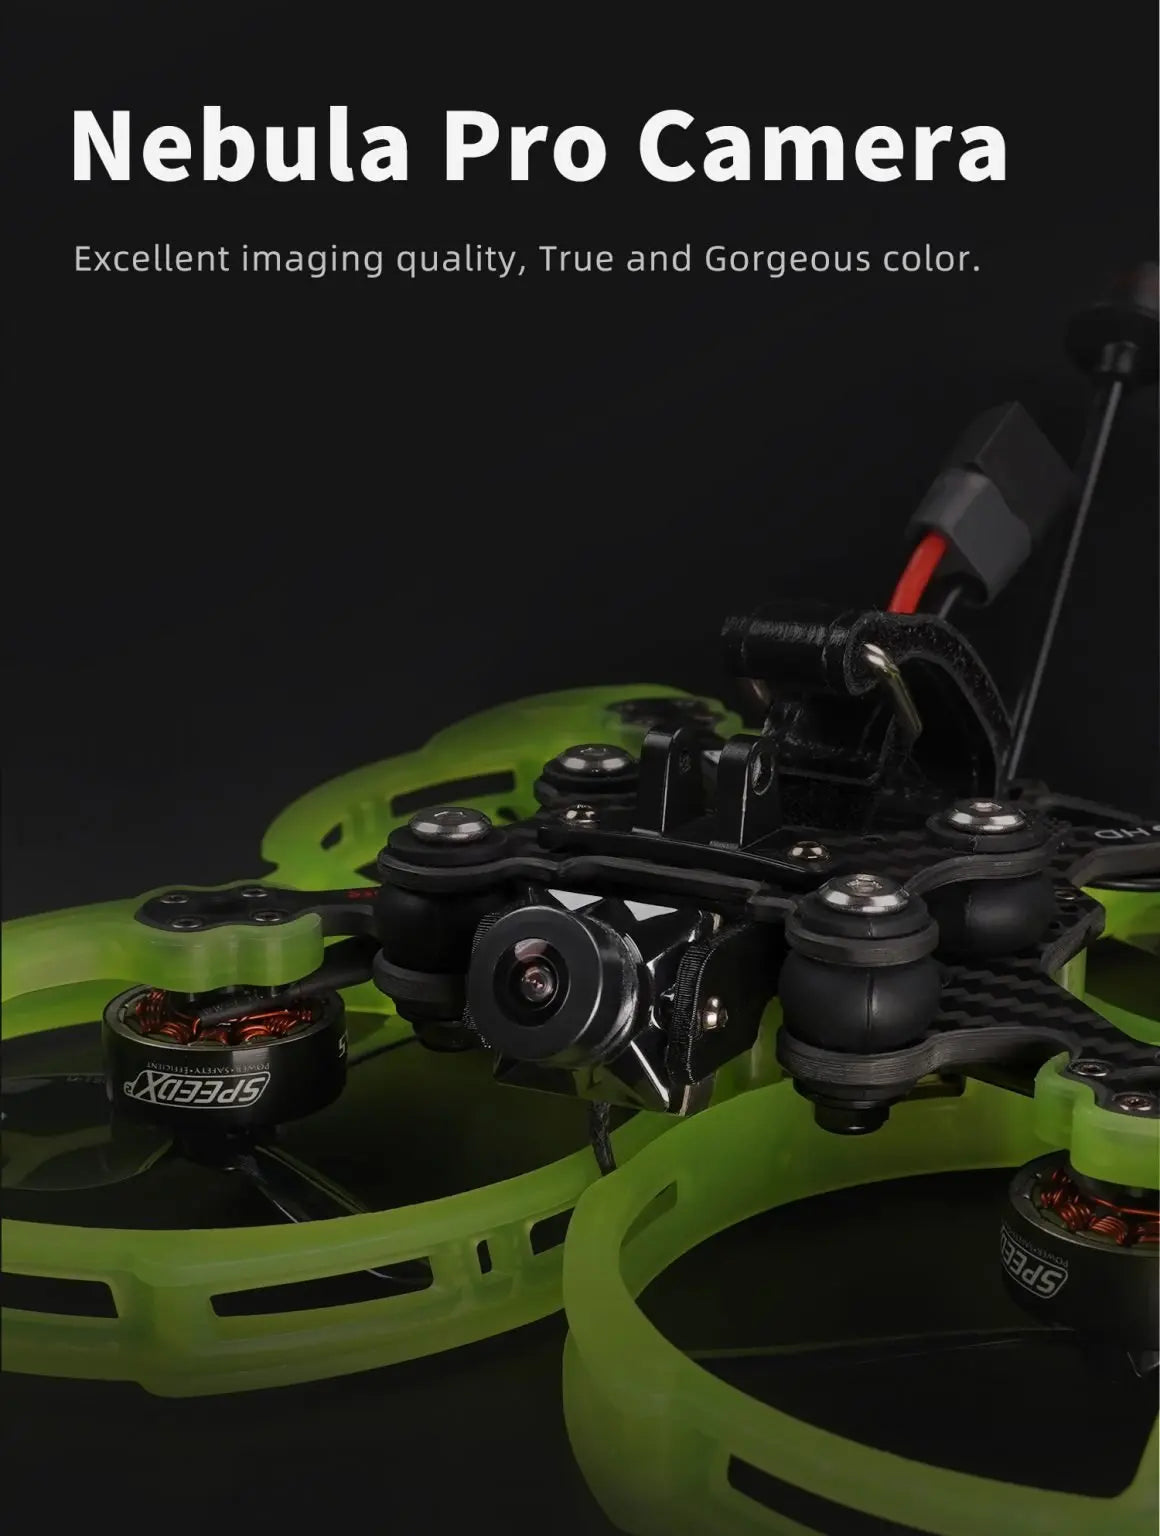 GEPRC CineLog35 Cinewhoop FPV Drone, Nebula Pro Camera Excellent imaging quality, True and Gorgeous color . XTZ as